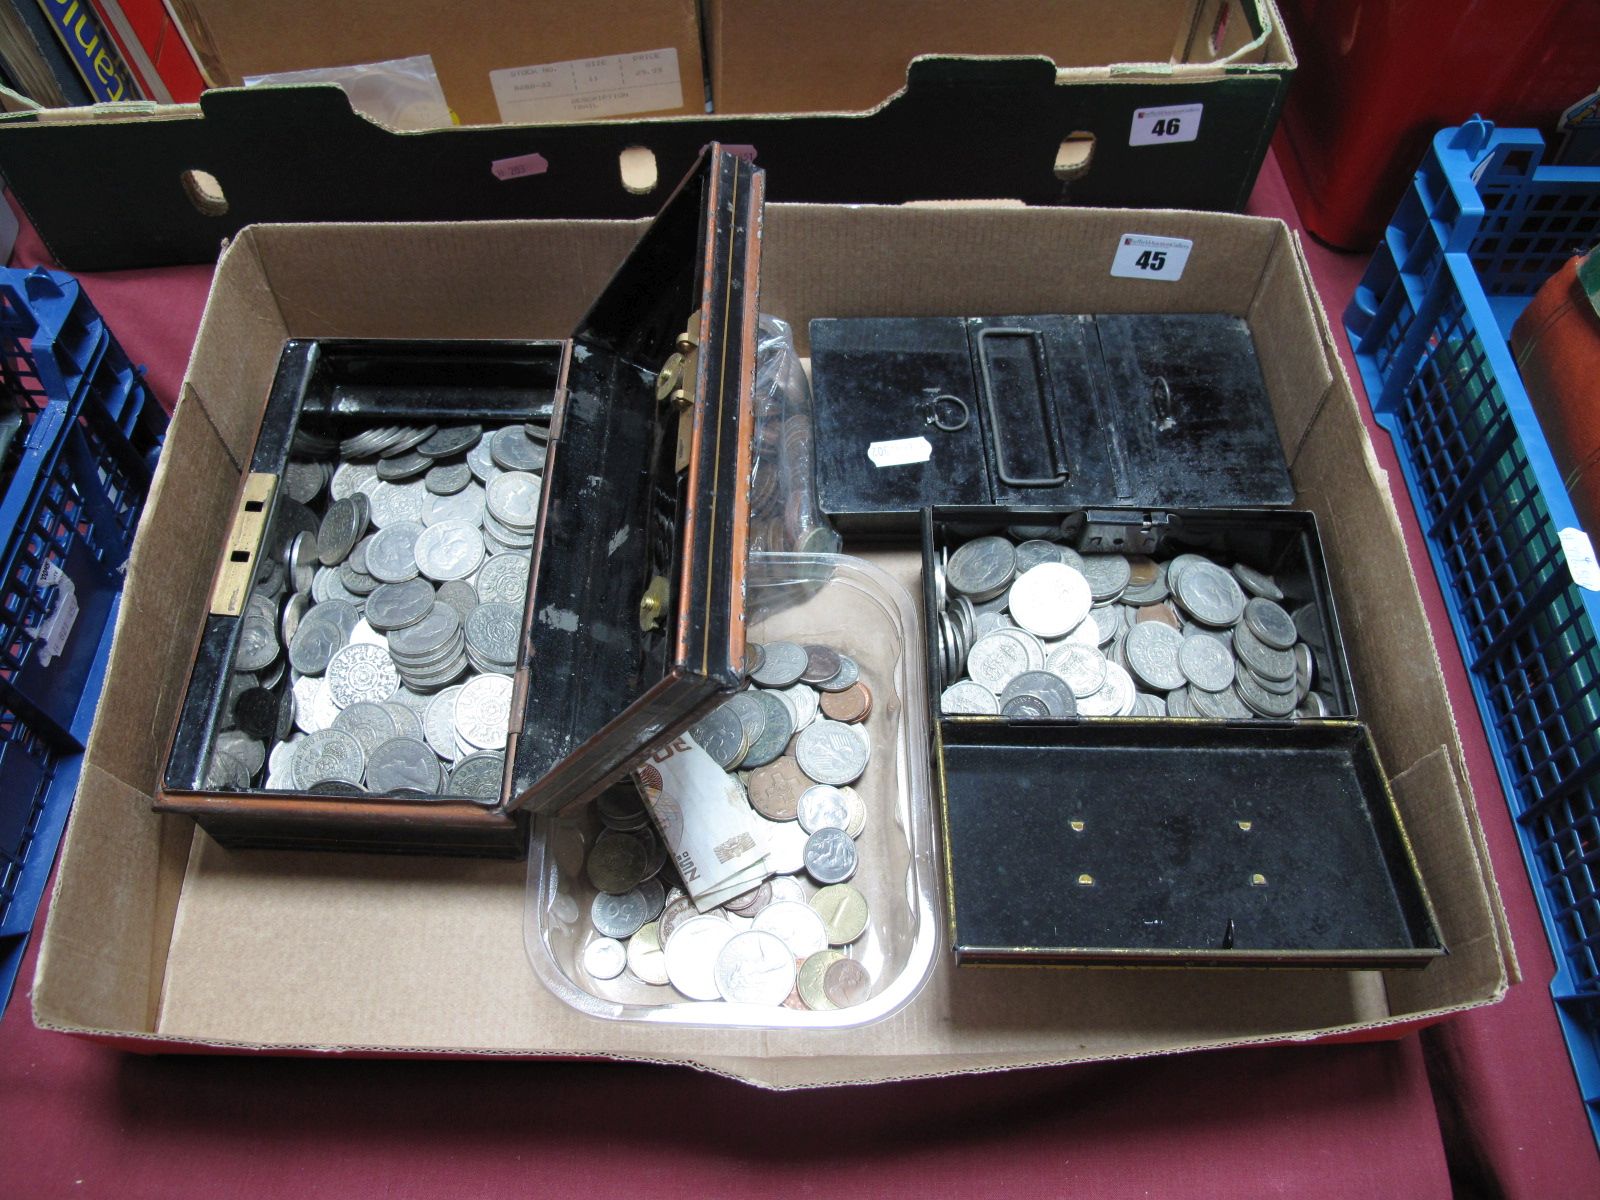 A Quantity of GB Coins, regularly base metal florins and shillings. Other coins; redeemable German